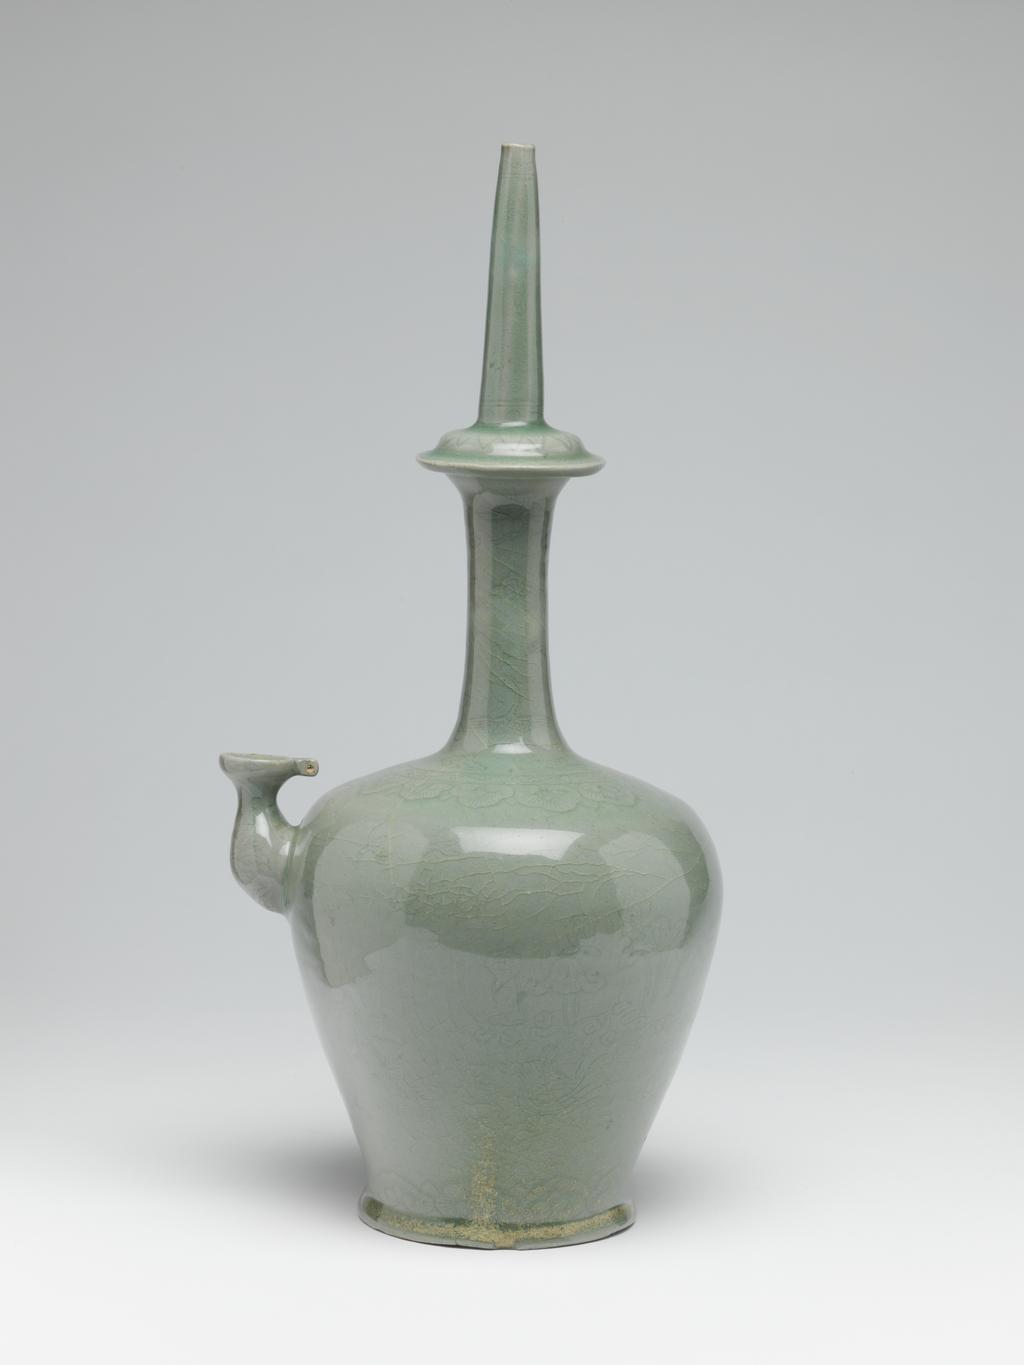 An image of Chongbyong. Kundika with willow and waterfowl design. This vessel has an ovoid body with a small spout on one side, and a long neck, with a flanged swelling in the centre. The lower part of the body contracts to a splayed footring, giving it a stable shape. The upper part of the long neck is cut into octagonal form, and has incised cloud motifs on each facet, while the projecting ring shows lotus petals and scrolling foliage. The lower part of the neck is decorated with flying cranes among clouds. A classic-scroll border and youi-heads are finely incised round the shoulder, and a key-fret border and further youi-heads round the foot. The body itself shows willow trees on one side and reeds on the other, with ducks and lotuses, flying cranes and geese delicately engraved between. Production Notes: This type of kundika, which is modelled on bronze examples decorated with silver inlay, was very popular in the Koryo dynasty. Both shape and design are very similar to the metal counterparts. The kundika (Chongbyong) was used in Buddhist ceremonies as a container for water, which was filled in through the spout and sprinkled from the narrow mouth. Similar sherds were excavated at kiln no.7, Sadang-ri, Kangjin-gun, South Cholla province, and were produced in the mature period of Koryo celadon, in the first half of the twelfth century. Production Place: Sadang-ri kilns. Kangjin-gun. South Cholla province. Korean. Stoneware, thrown, with applied lugs, incised and celadon-glazed, height (whole) 34.7 cm, diameter (maximum) 16.0 cm, diameter (foot) 9.0 cm, circa 1101 to 1150. Koryo Dynasty.